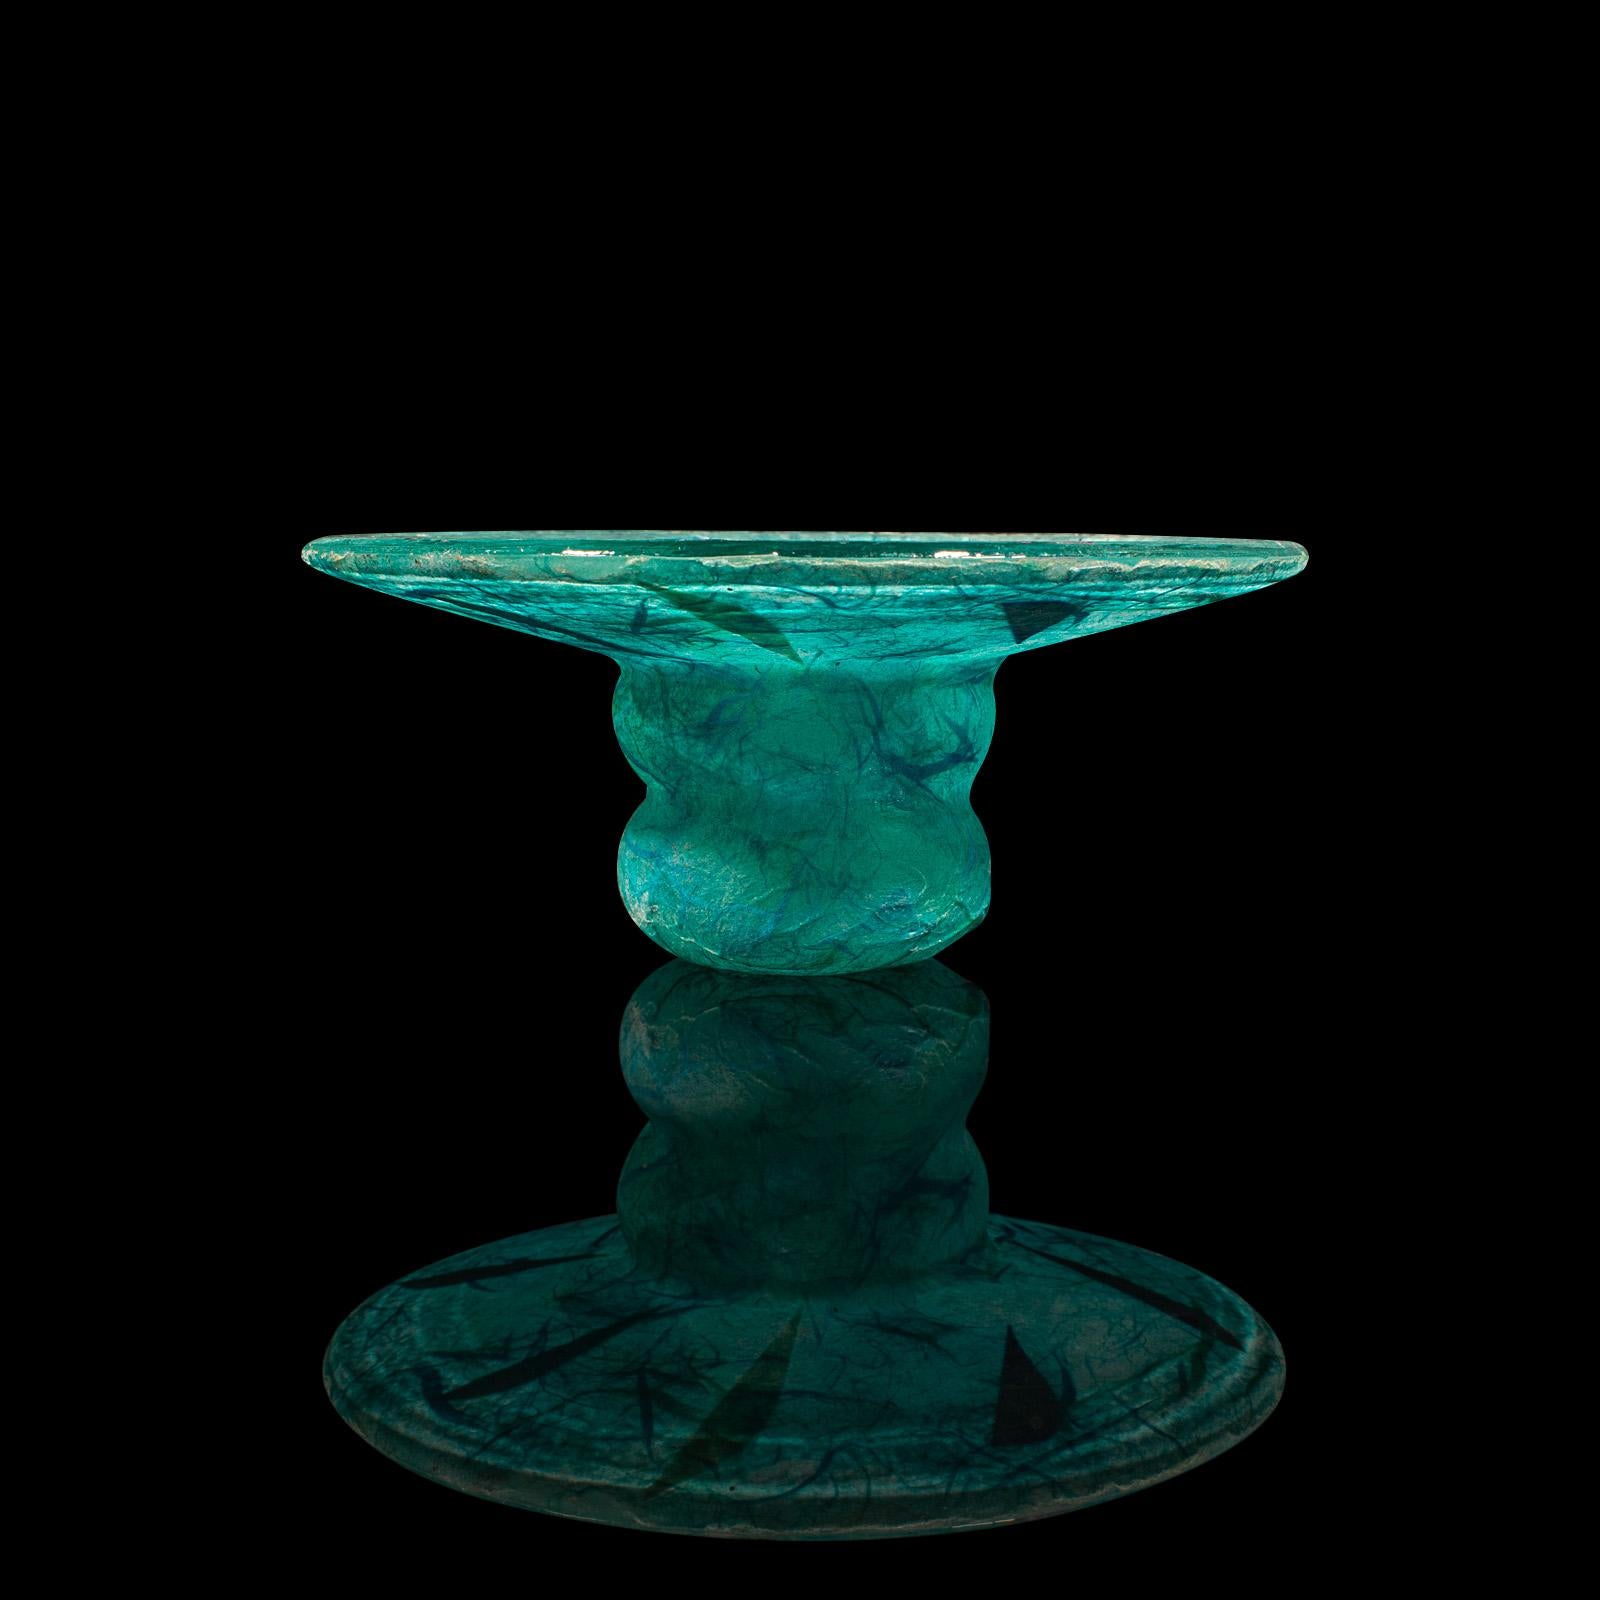 Contemporary Decorative Tea Light Stand, English Art Glass, Votive Candle Holder In Good Condition For Sale In Hele, Devon, GB